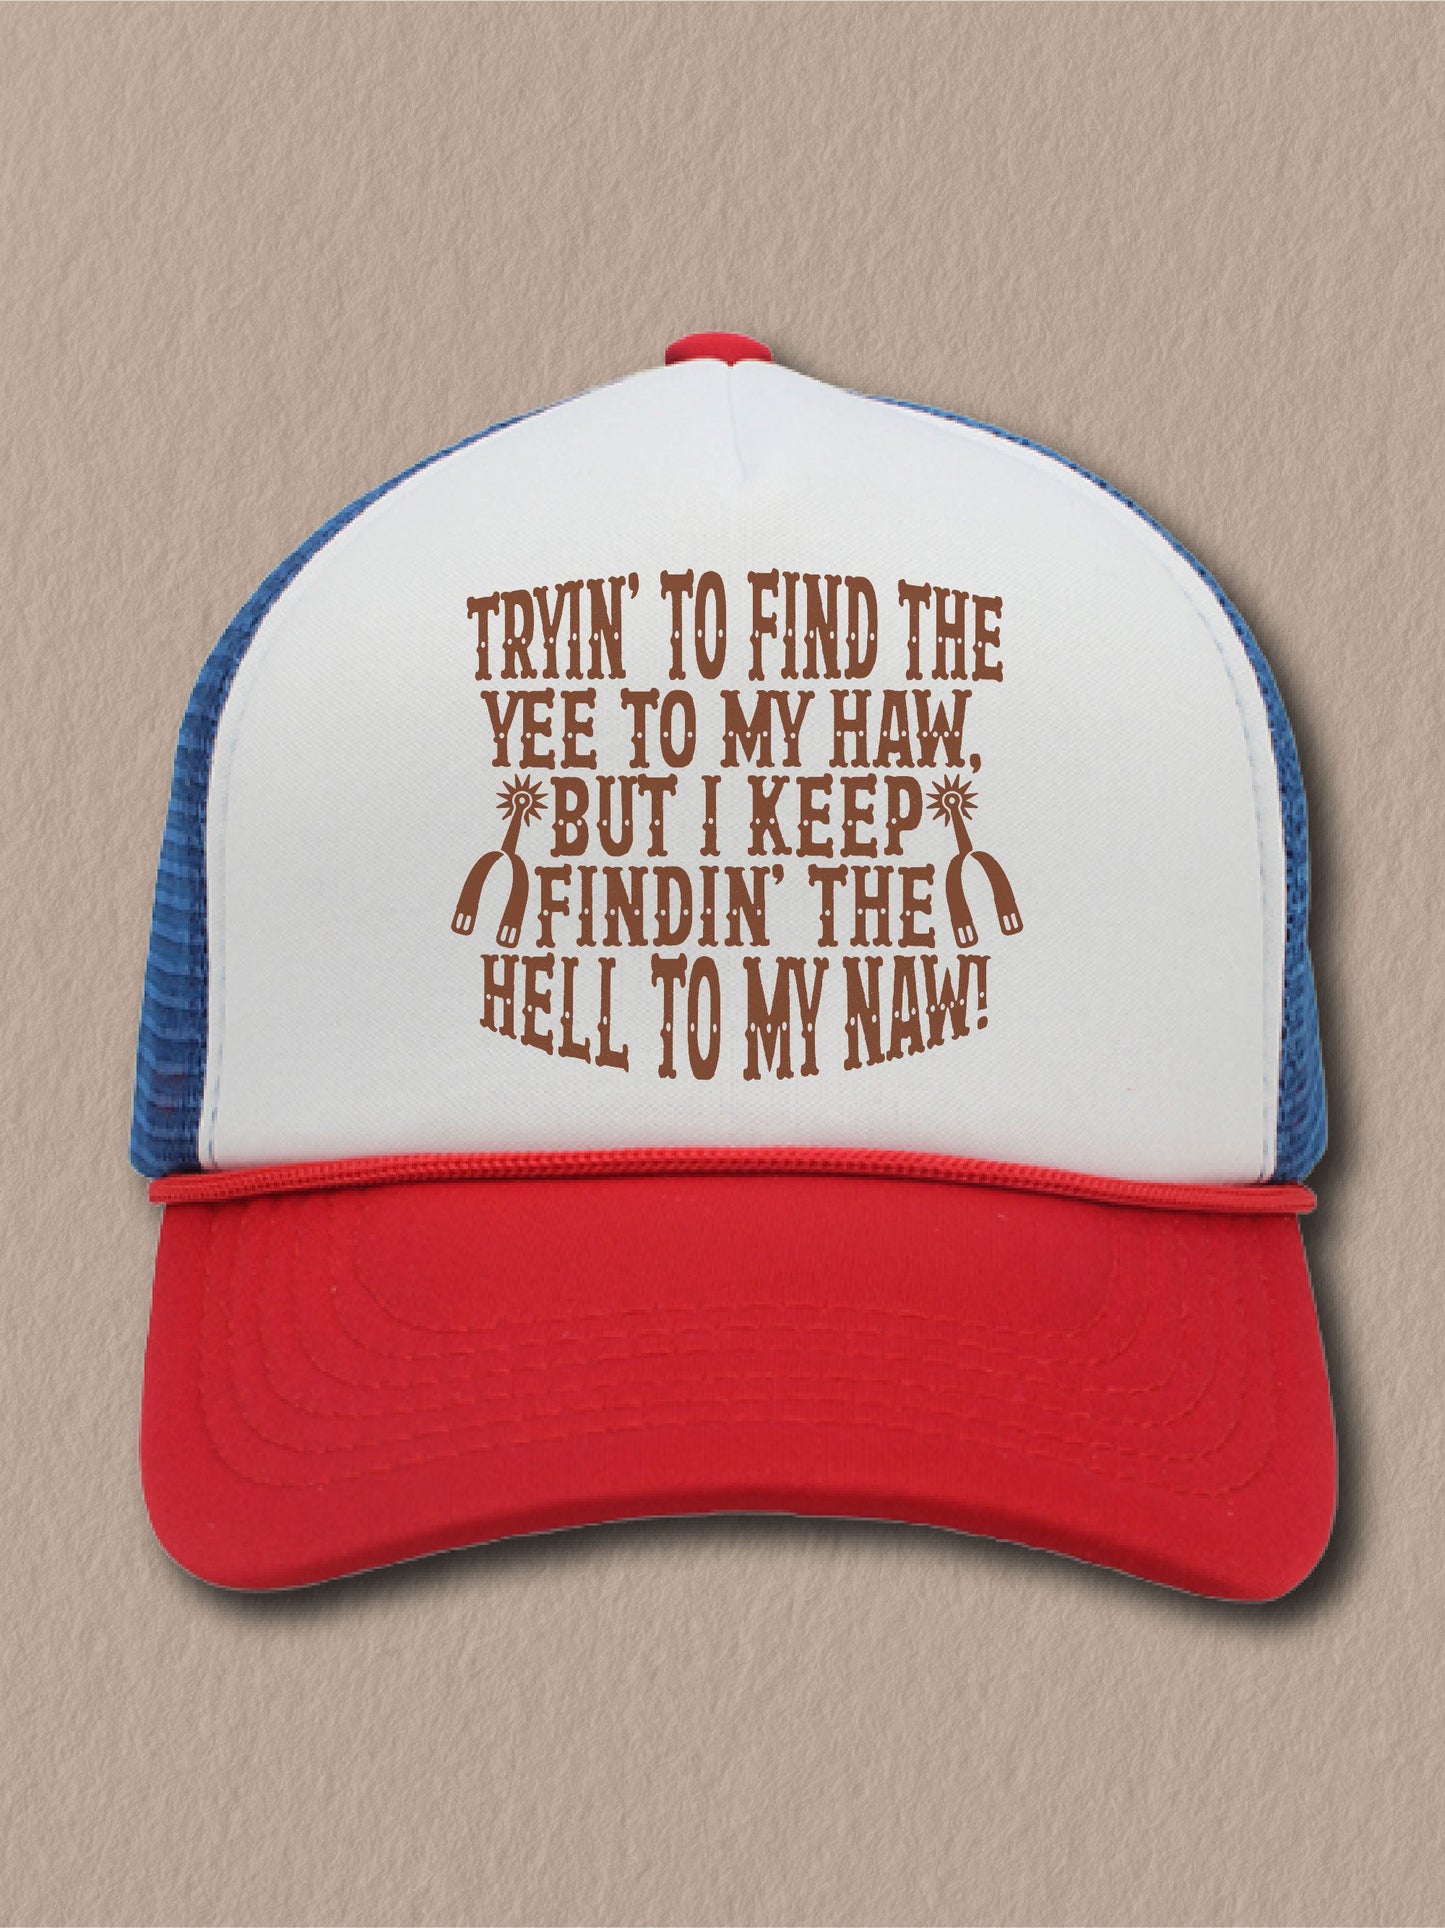 Tryin' To Find The Yee To My Haw, But I Keep Findin' The He-- To My Naw! - (Hat)